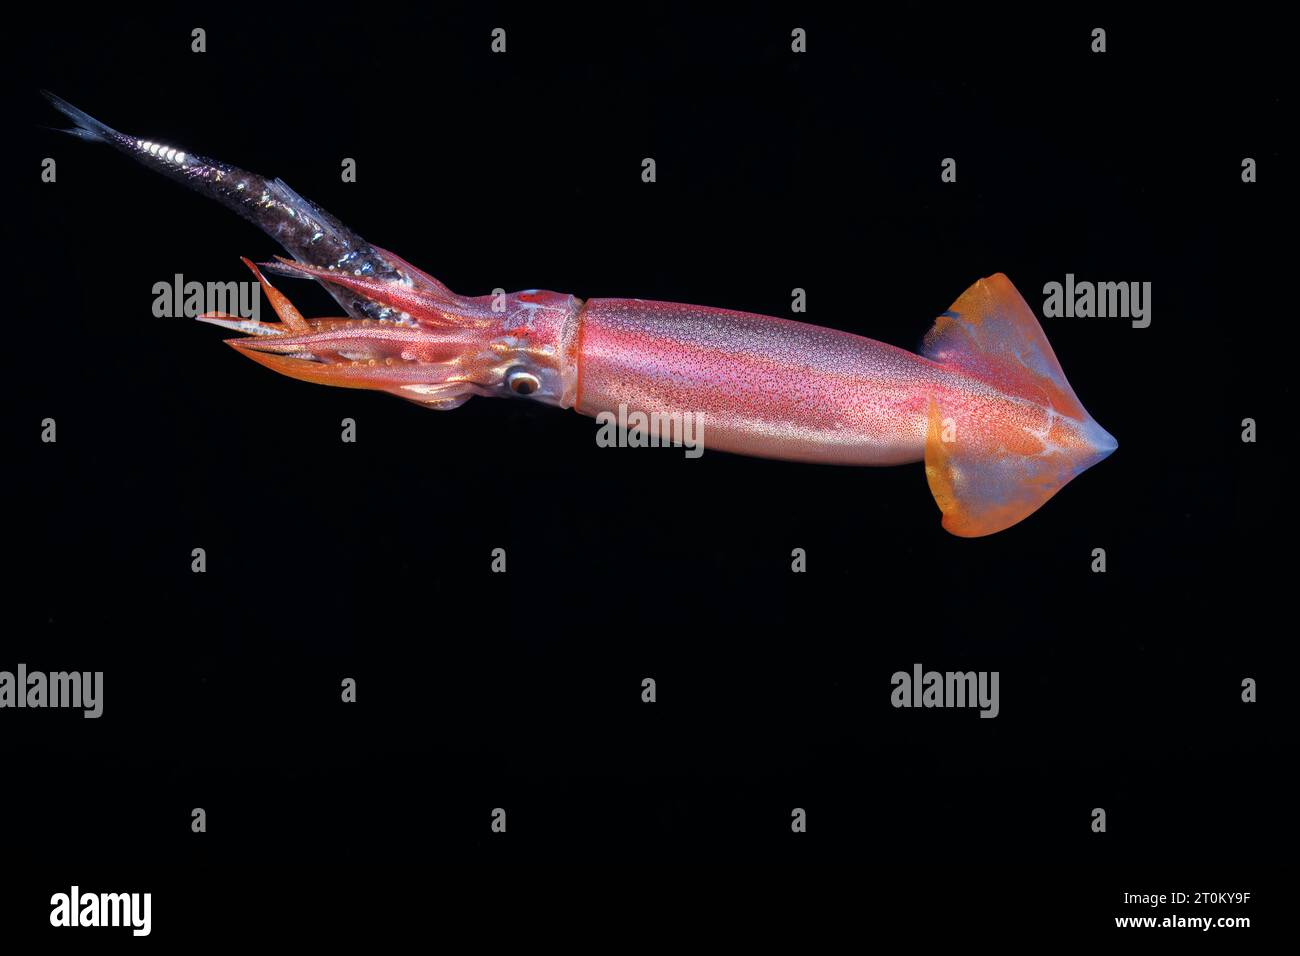 The purpleback flying squid or purpleback squid, Sthenoteuthis oualaniensis, is a species of cephalopod occurring in the Indo-Pacific. It is considere Stock Photo